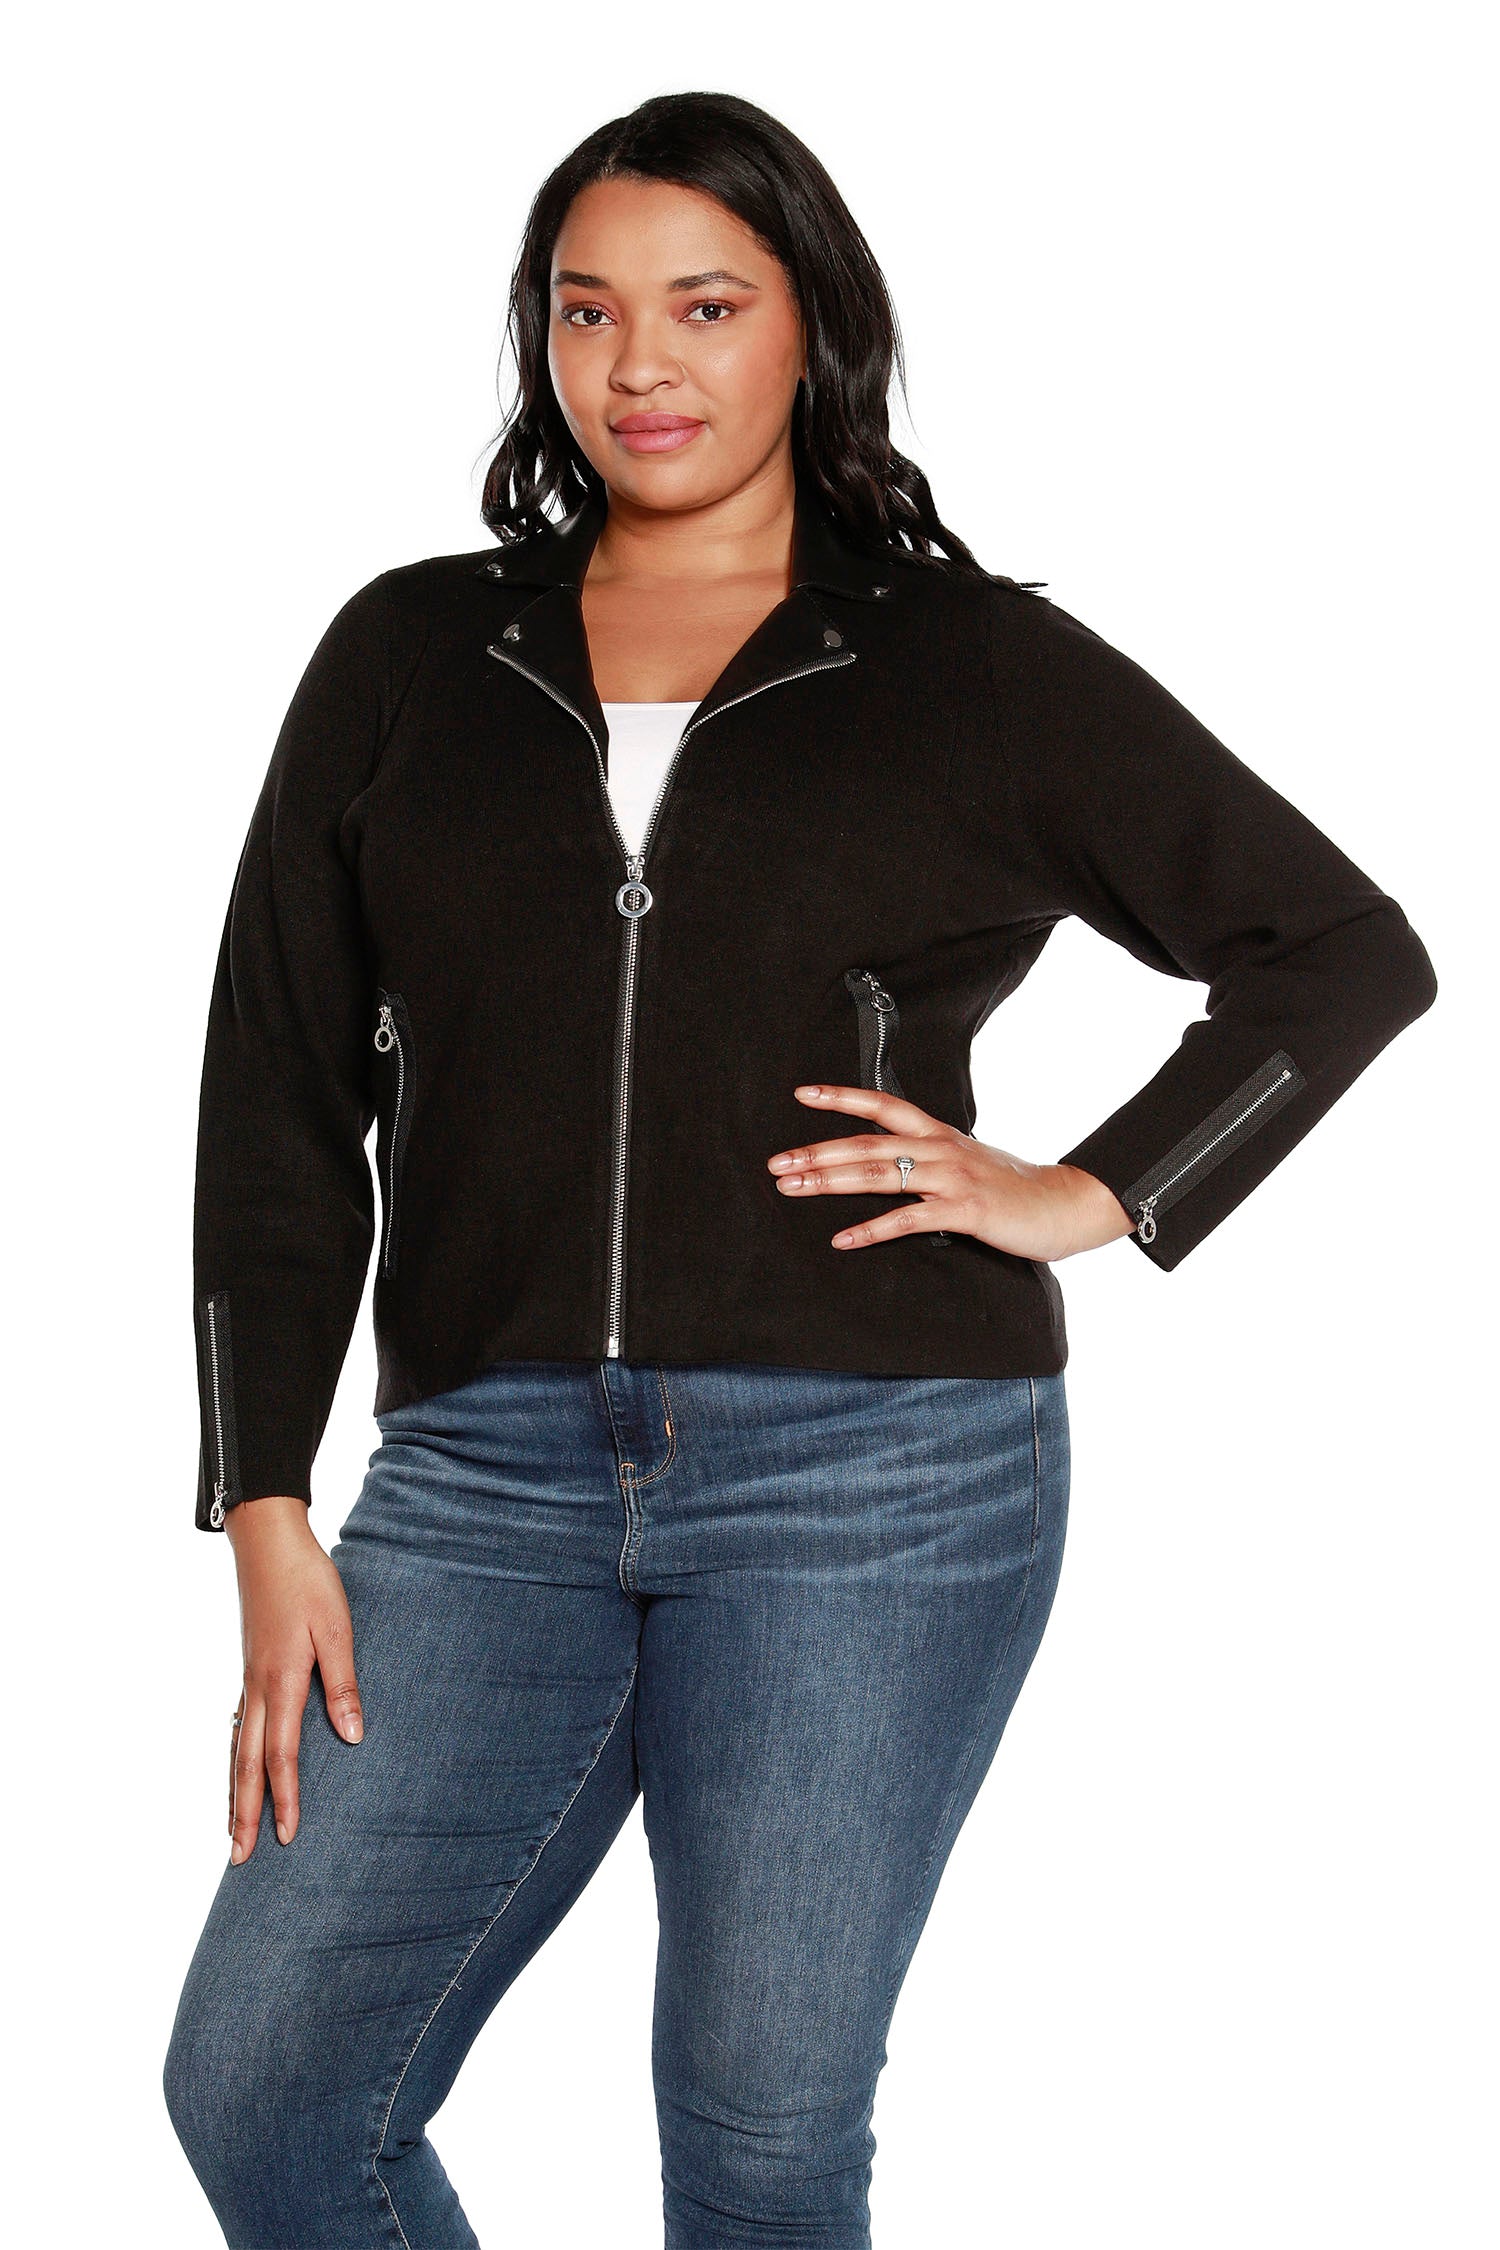 Women's Super Soft Moto-Inspired Jacket with Vegan Leather Collar | Curvy